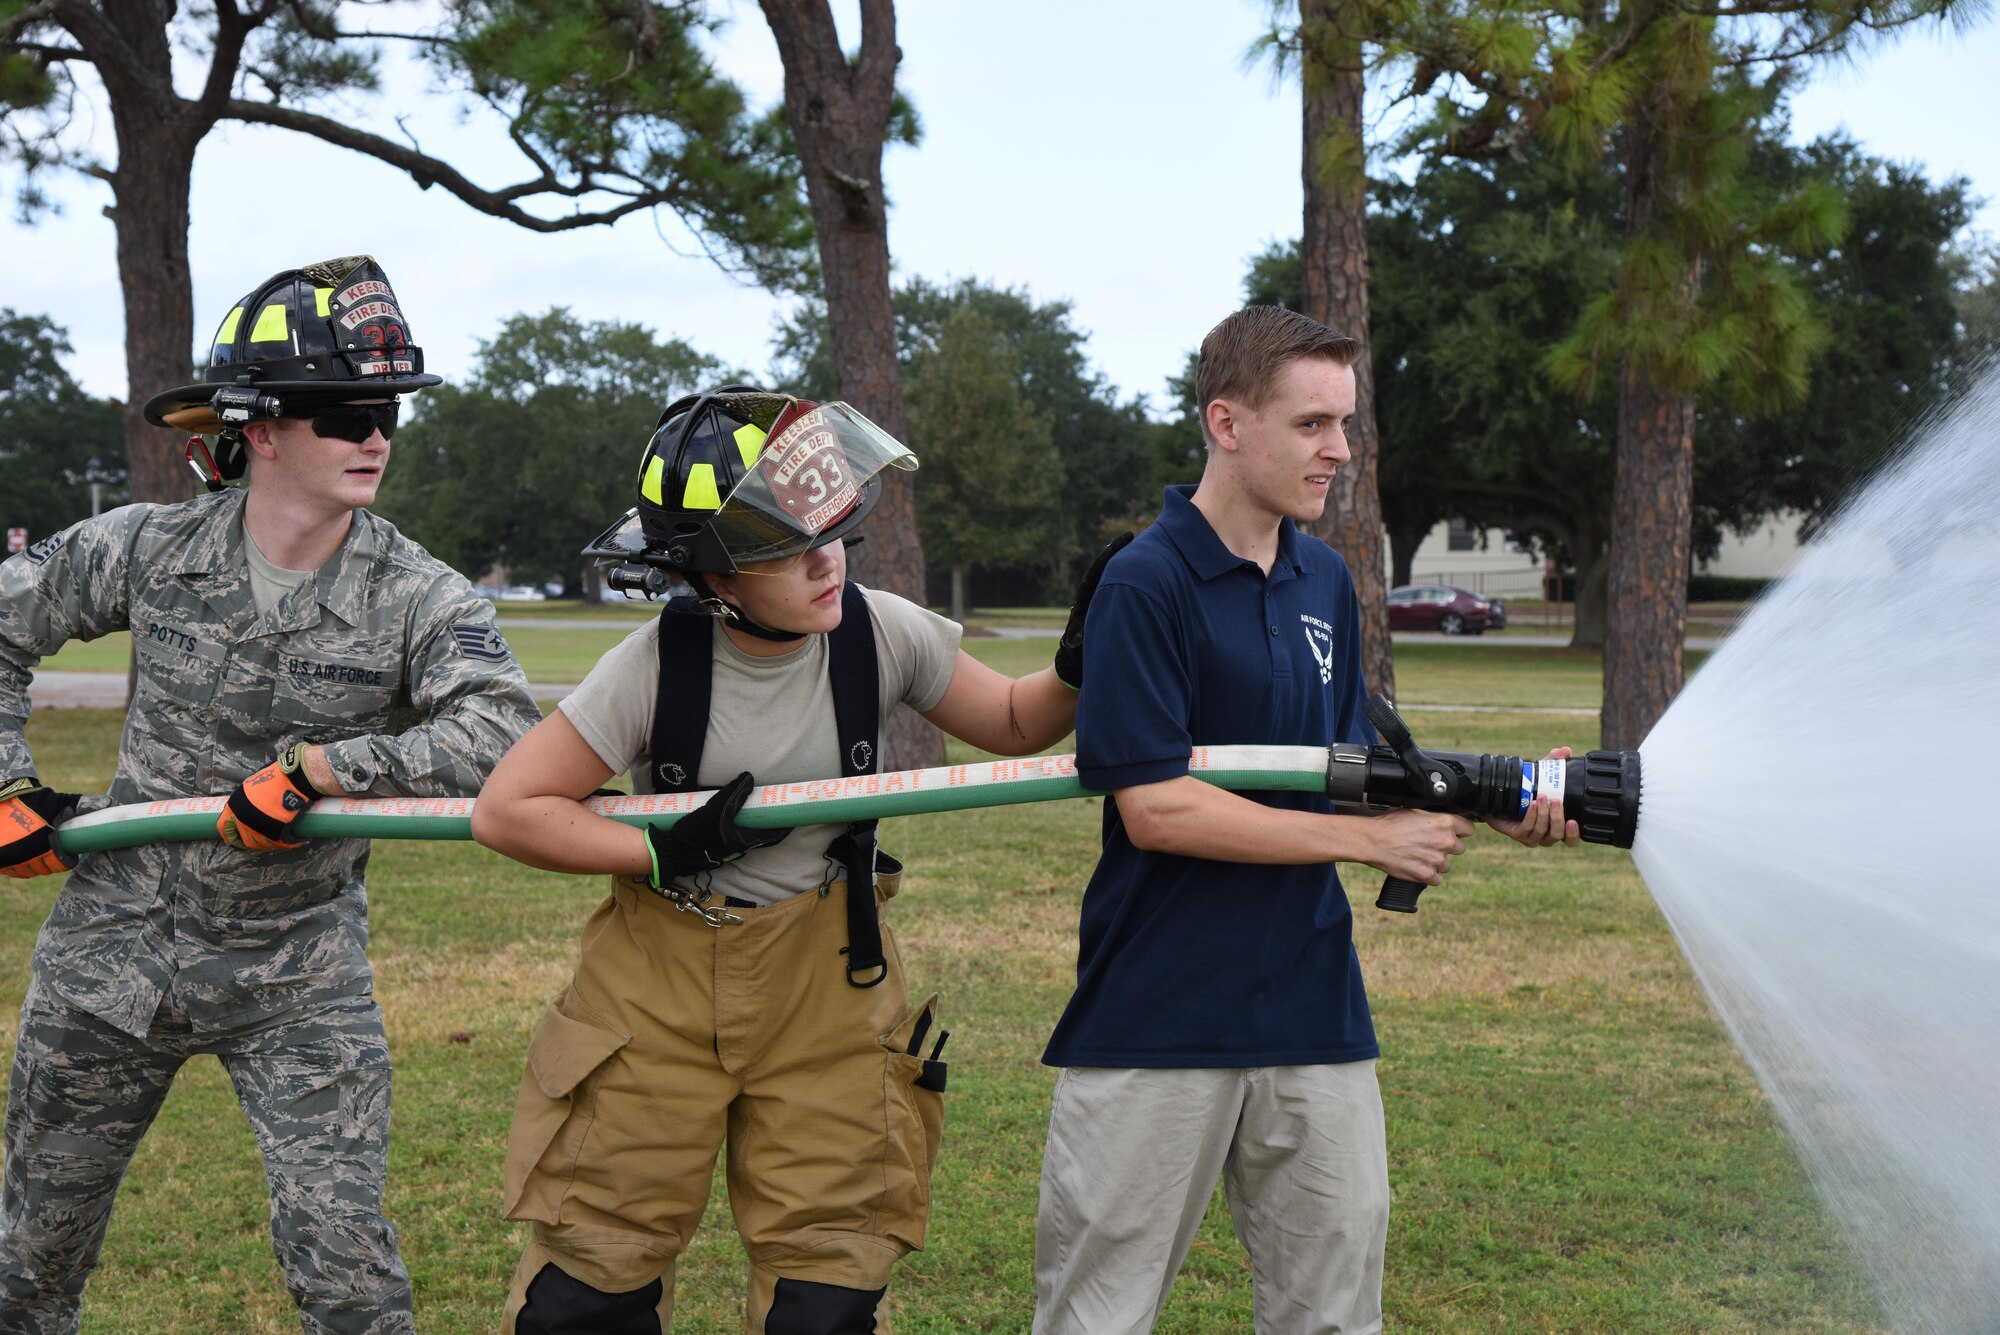 Staff Sgt. Codee Potts, and Airman 1st Class Hannah Reichert, 81st Infrastructure Division firefighters, assist Riley McElfish, Bay High School Junior ROTC cadet, with operating a fire hose at the Science, Technology, Engineering and Mathematics Diversity Outreach Day Sept. 15, 2017, on Keesler Air Force Base, Mississippi. The event consisted of 10 Mississippi gulf coast high school Junior ROTC units viewing an 81st Security Forces Squadron military working dog demonstration and receiving information about Air Force opportunities and accession requirements with an emphasis on STEM. They also competed in several team building activities. (U.S. Air Force photo by Kemberly Groue)